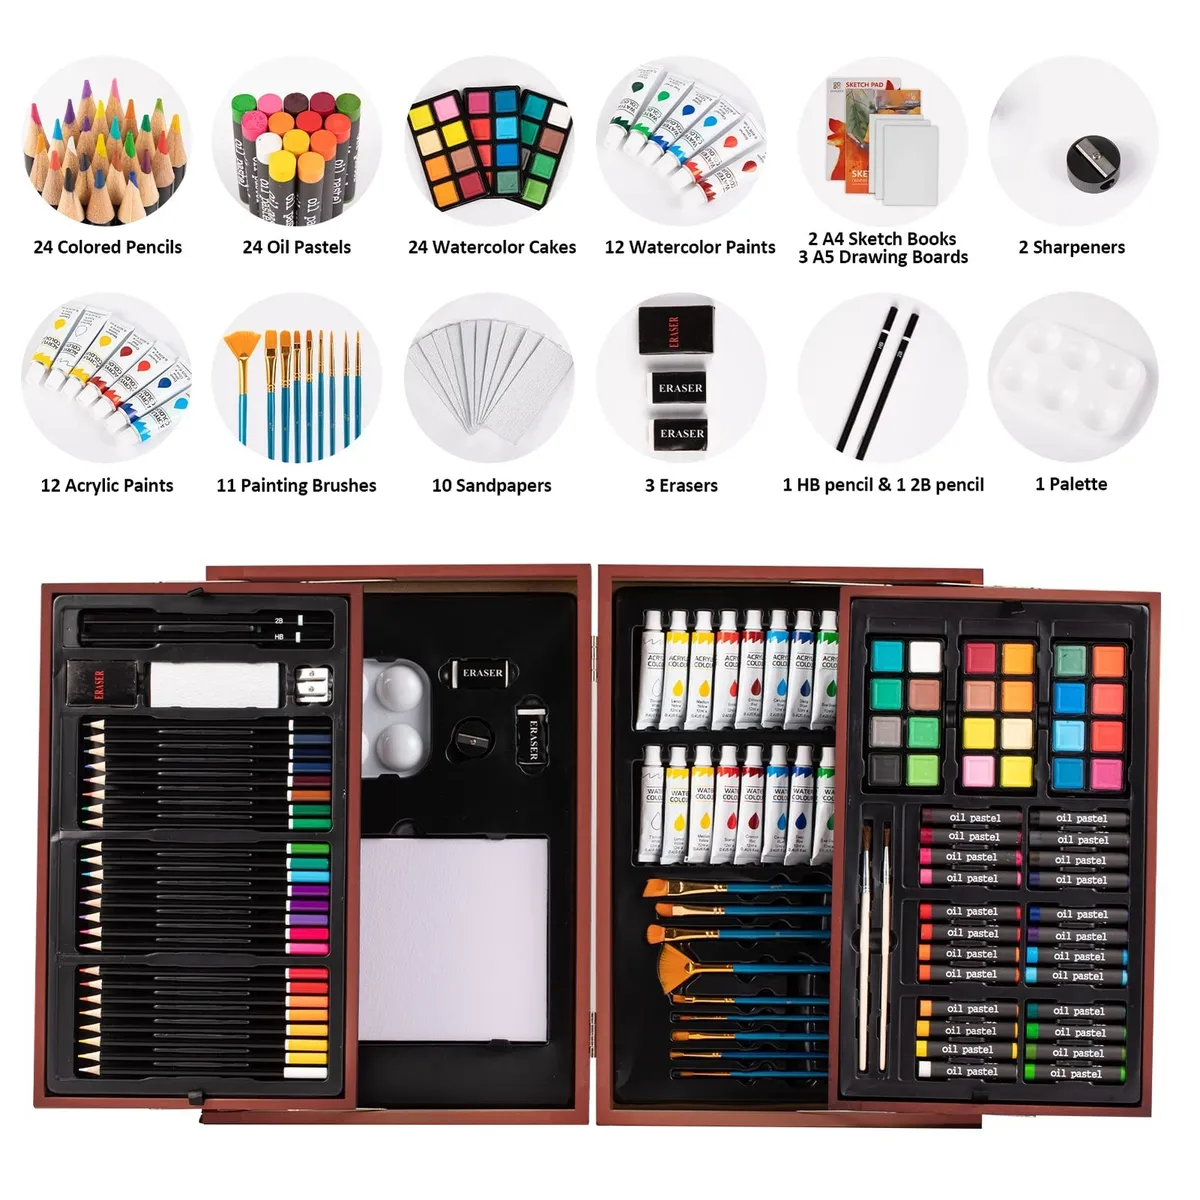 POPYOLA Art Supplies Deluxe Art Set Professional Art Kit in Portable Wooden Case 3 Drawing Pads Oil Pastels Colored Pencils Creative Gift for Teens Be